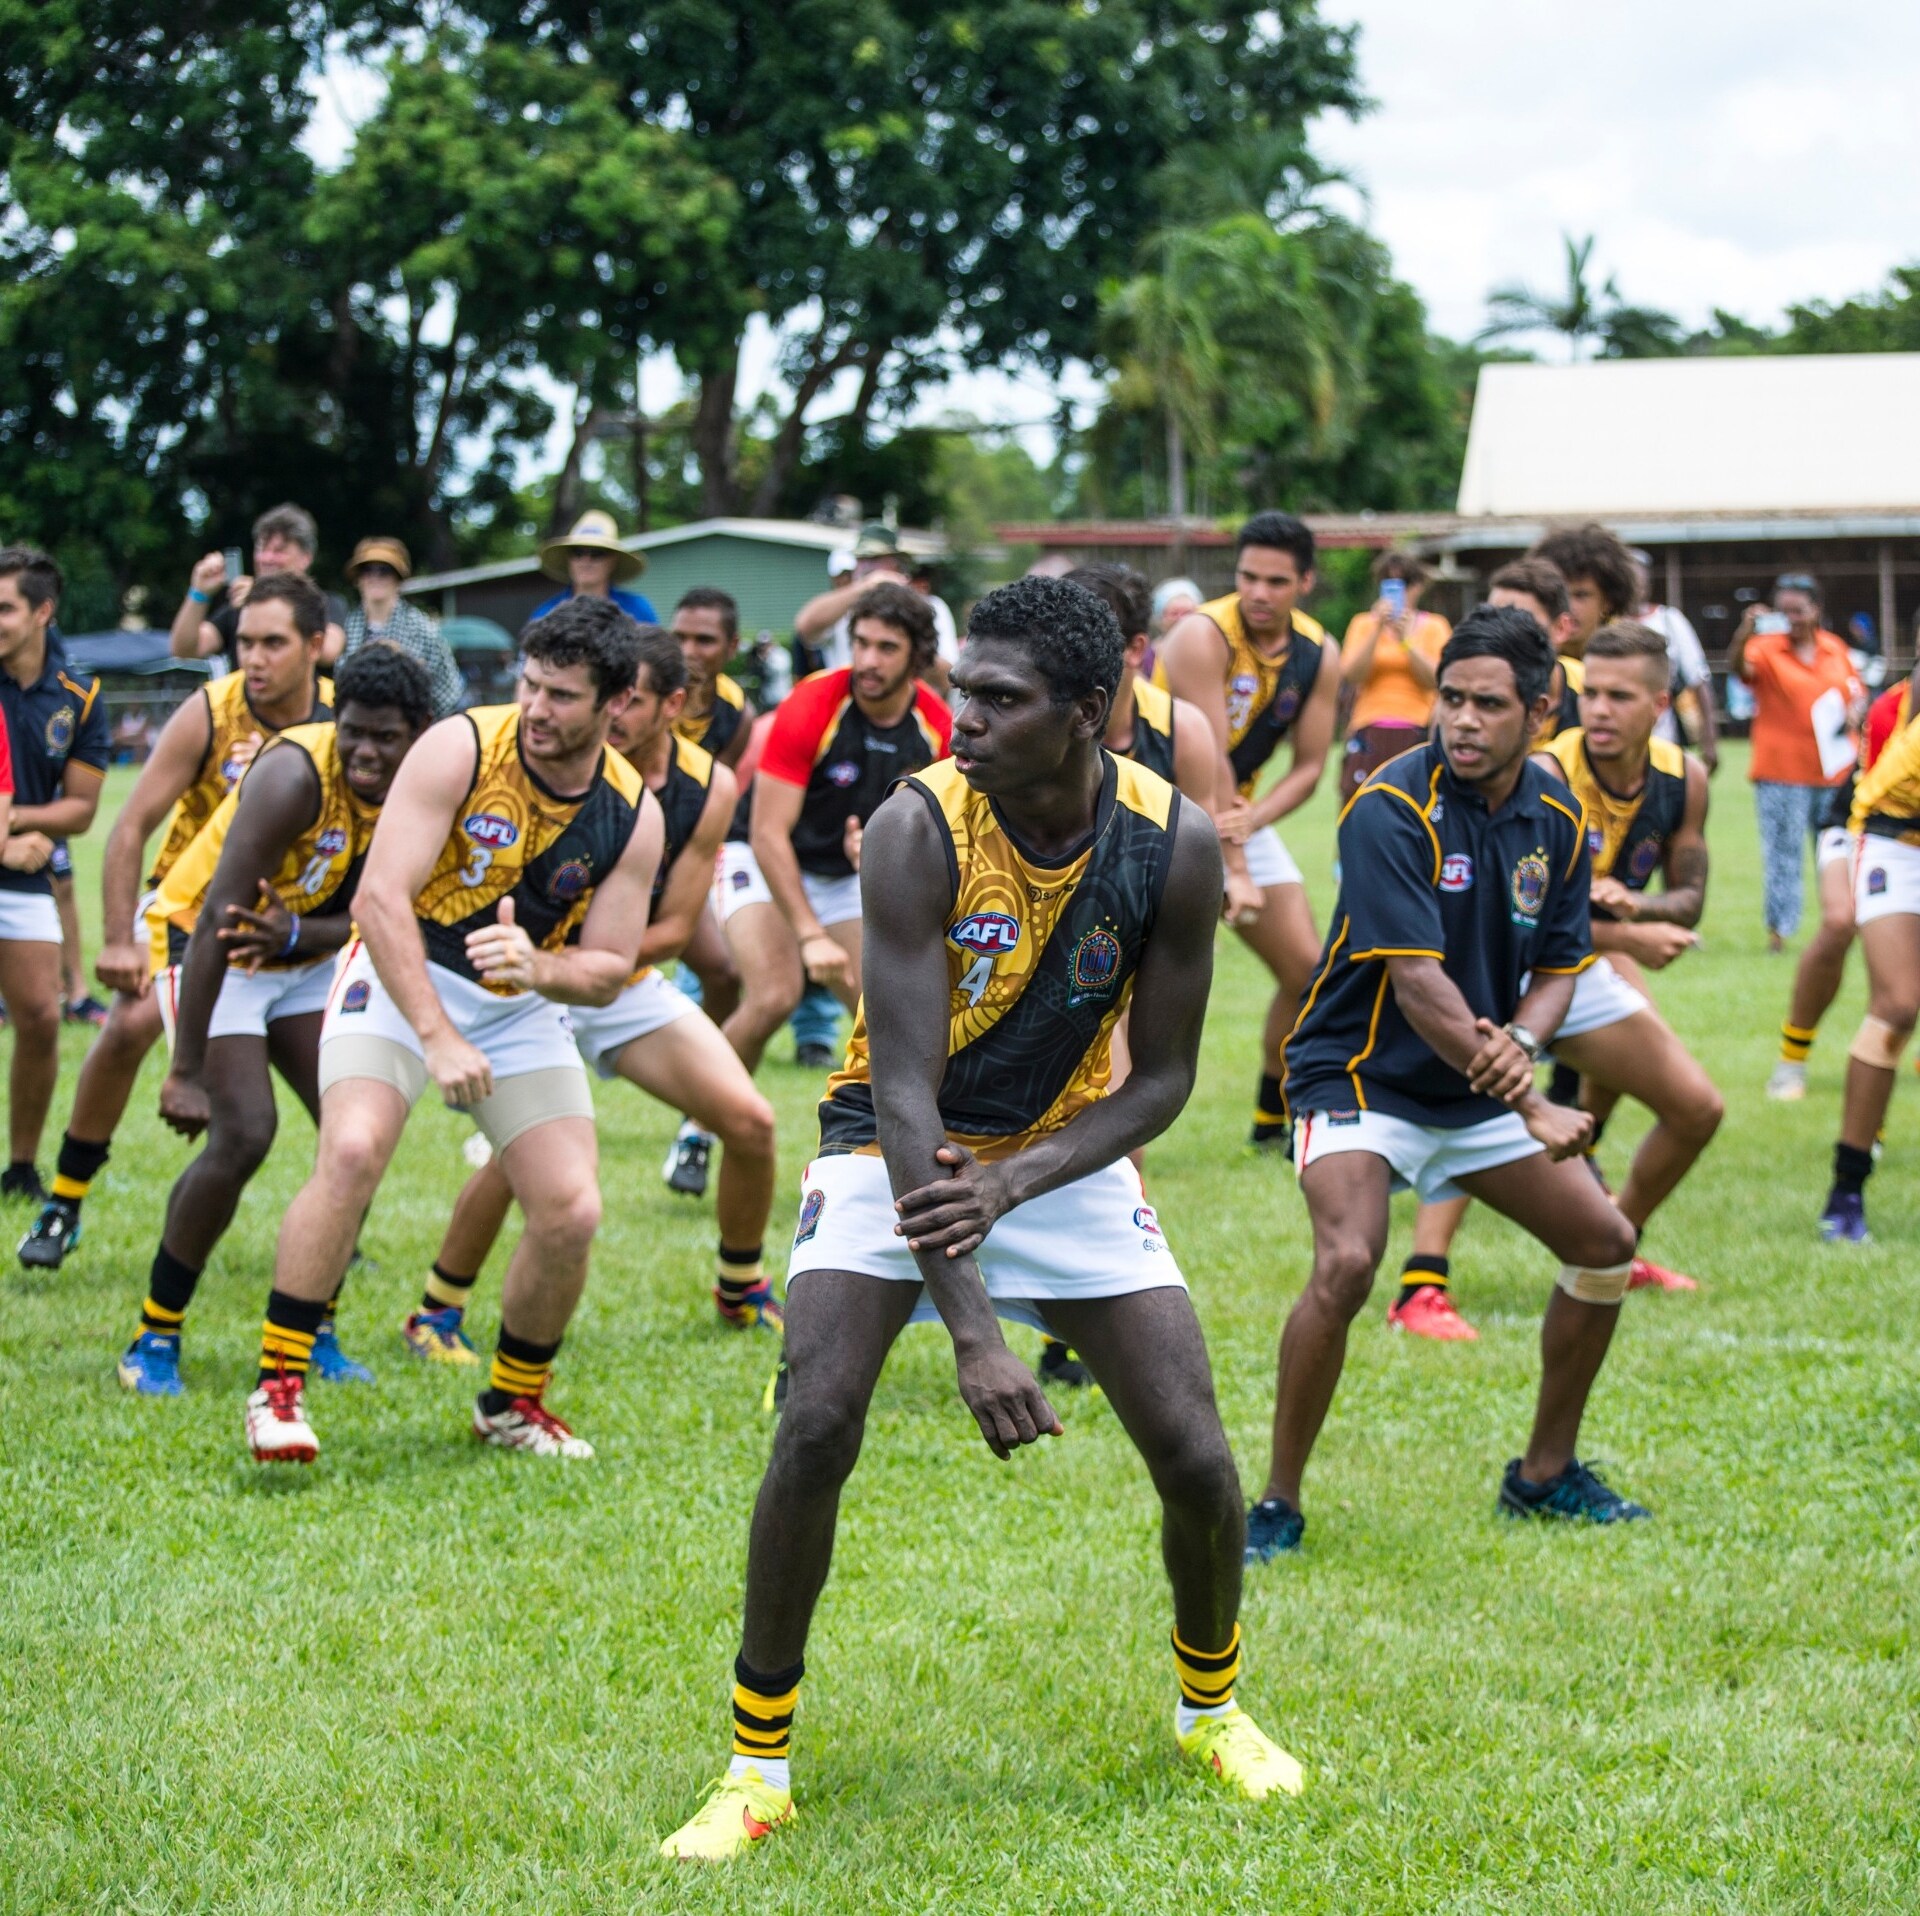 Football players at the Tiwi Islands Grand Final in Tiwi Islands © Tourism NT/Shaana McNaught